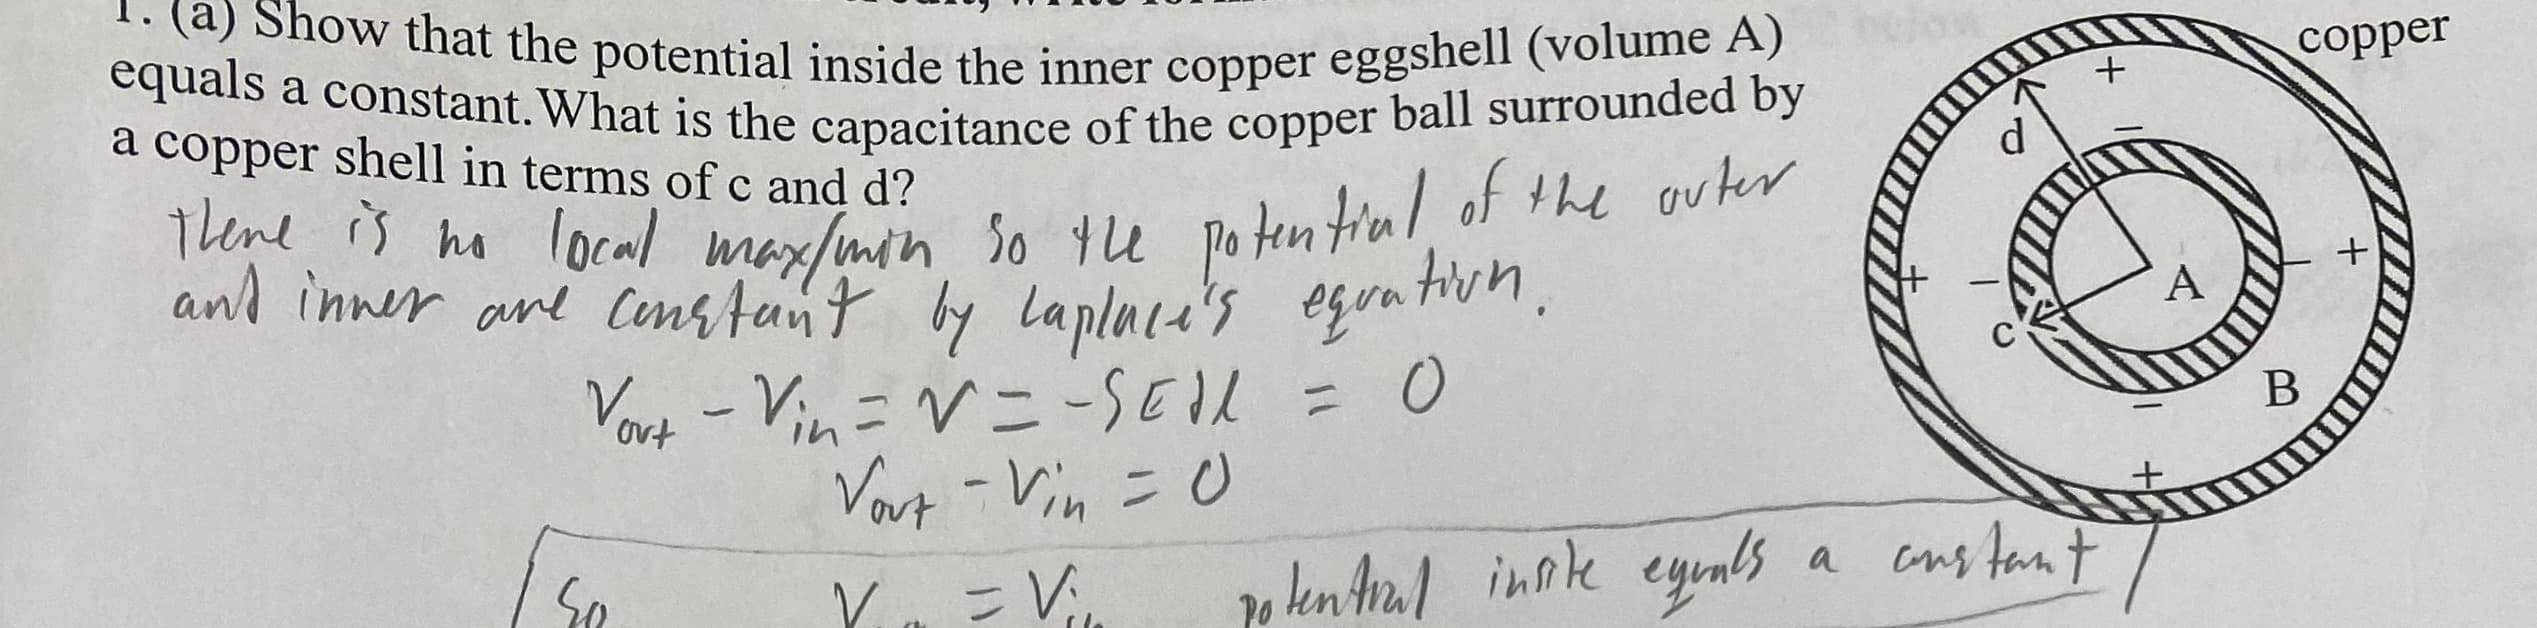 1. (a) Show that the potential inside the inner copper eggshell (volume A)
copper
equals a constant. What is the capacitance of the copper ball surrounded by
a copper shell in terms of c and d?
thene is ha local max/min So tu po ten tial of the outer
and inner and cons funt by Lanlnce's eguatiun,
out
3=31=N="1-
Vart -Vin =0
a cus tant
kn ta/ inok egunls
So
